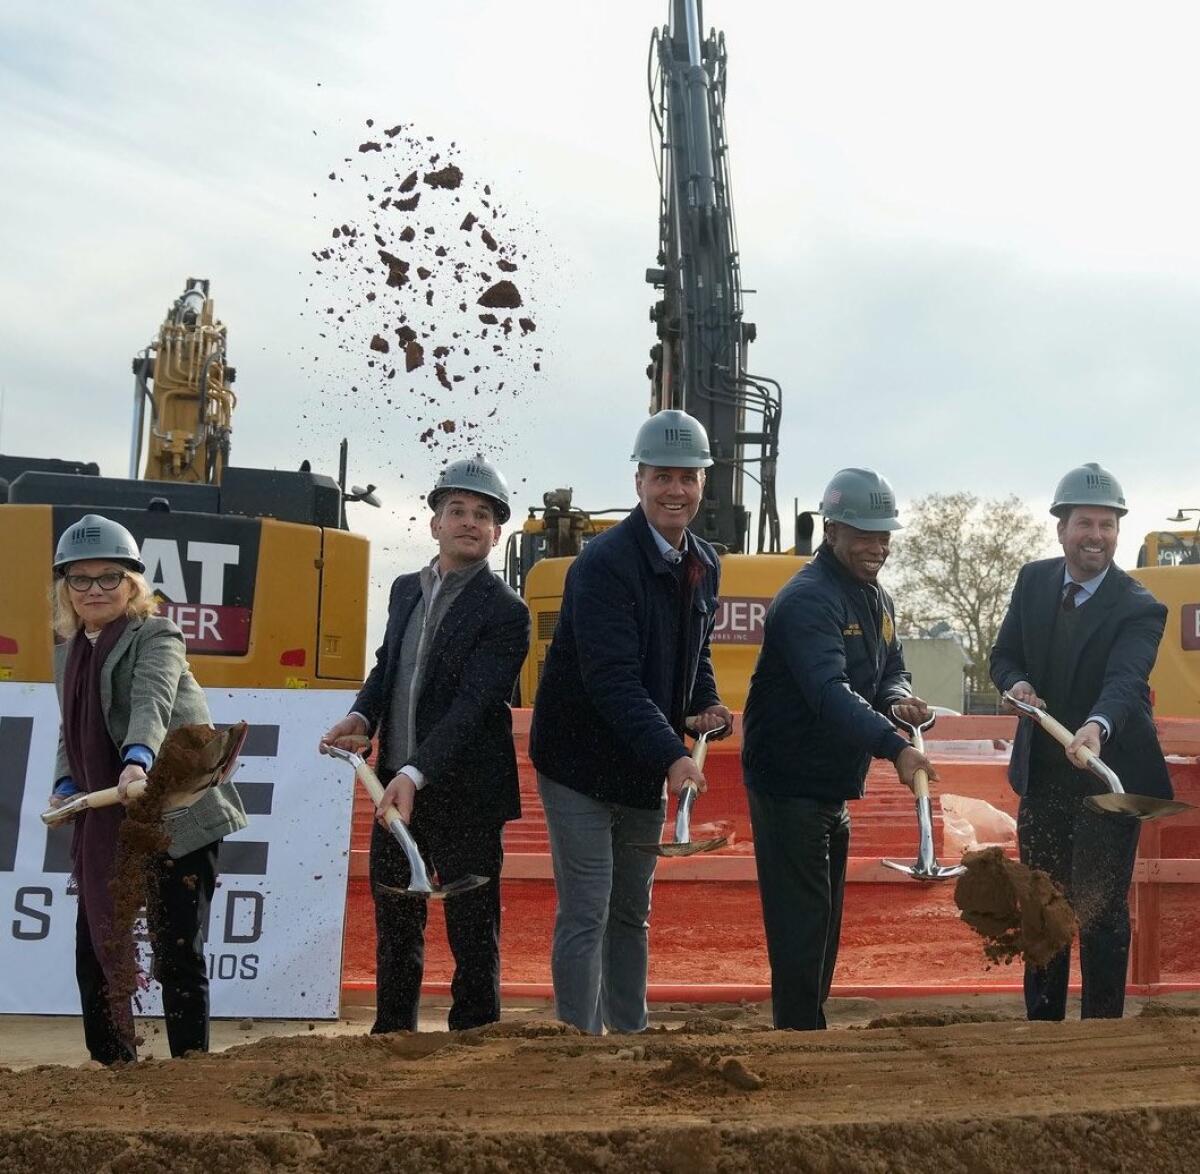 A line of five people with shovels, breaking ground at a construction site